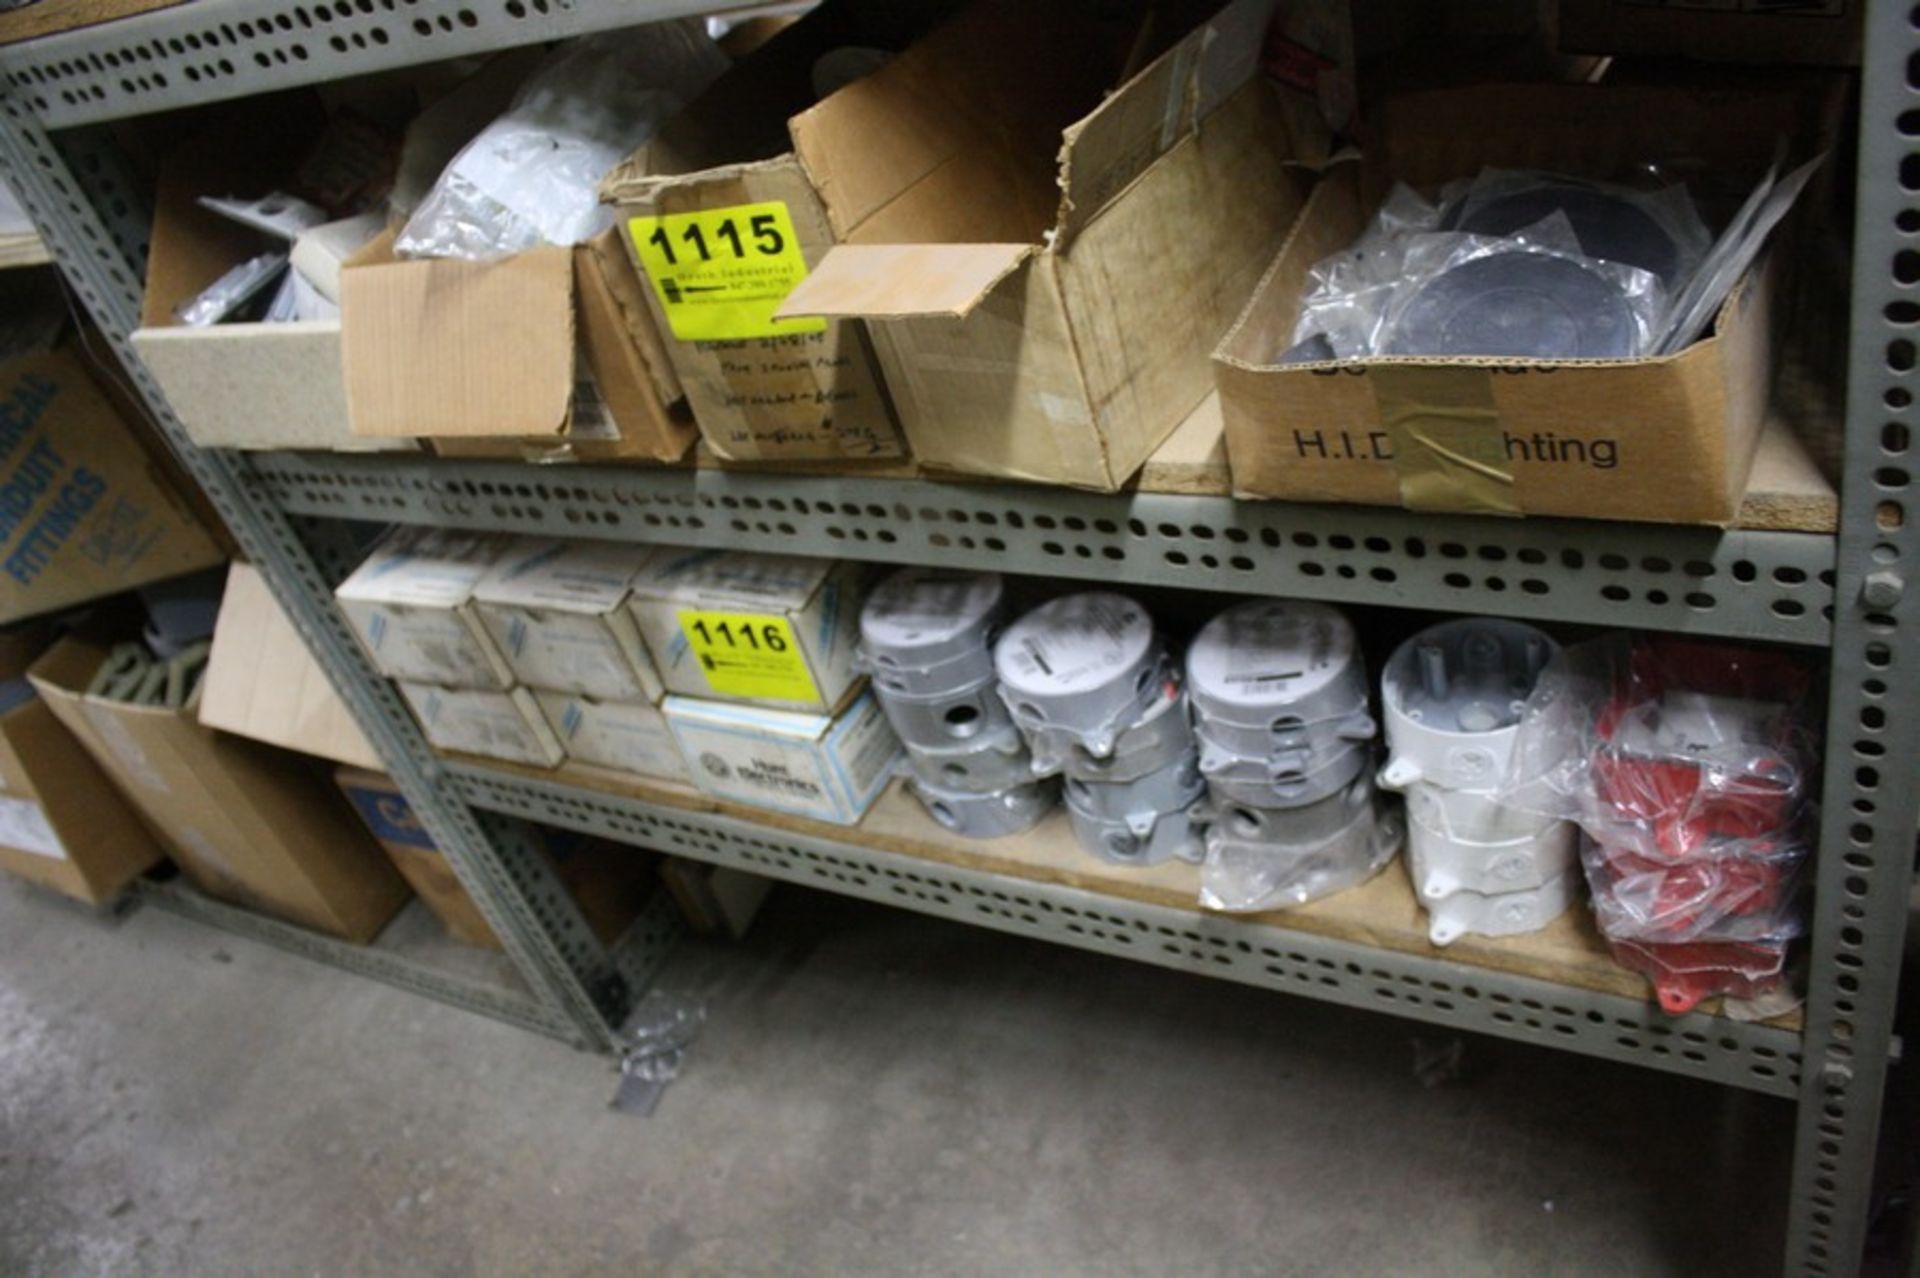 ASSORTED OUTLET BOXES AND PLATES ON SHELF